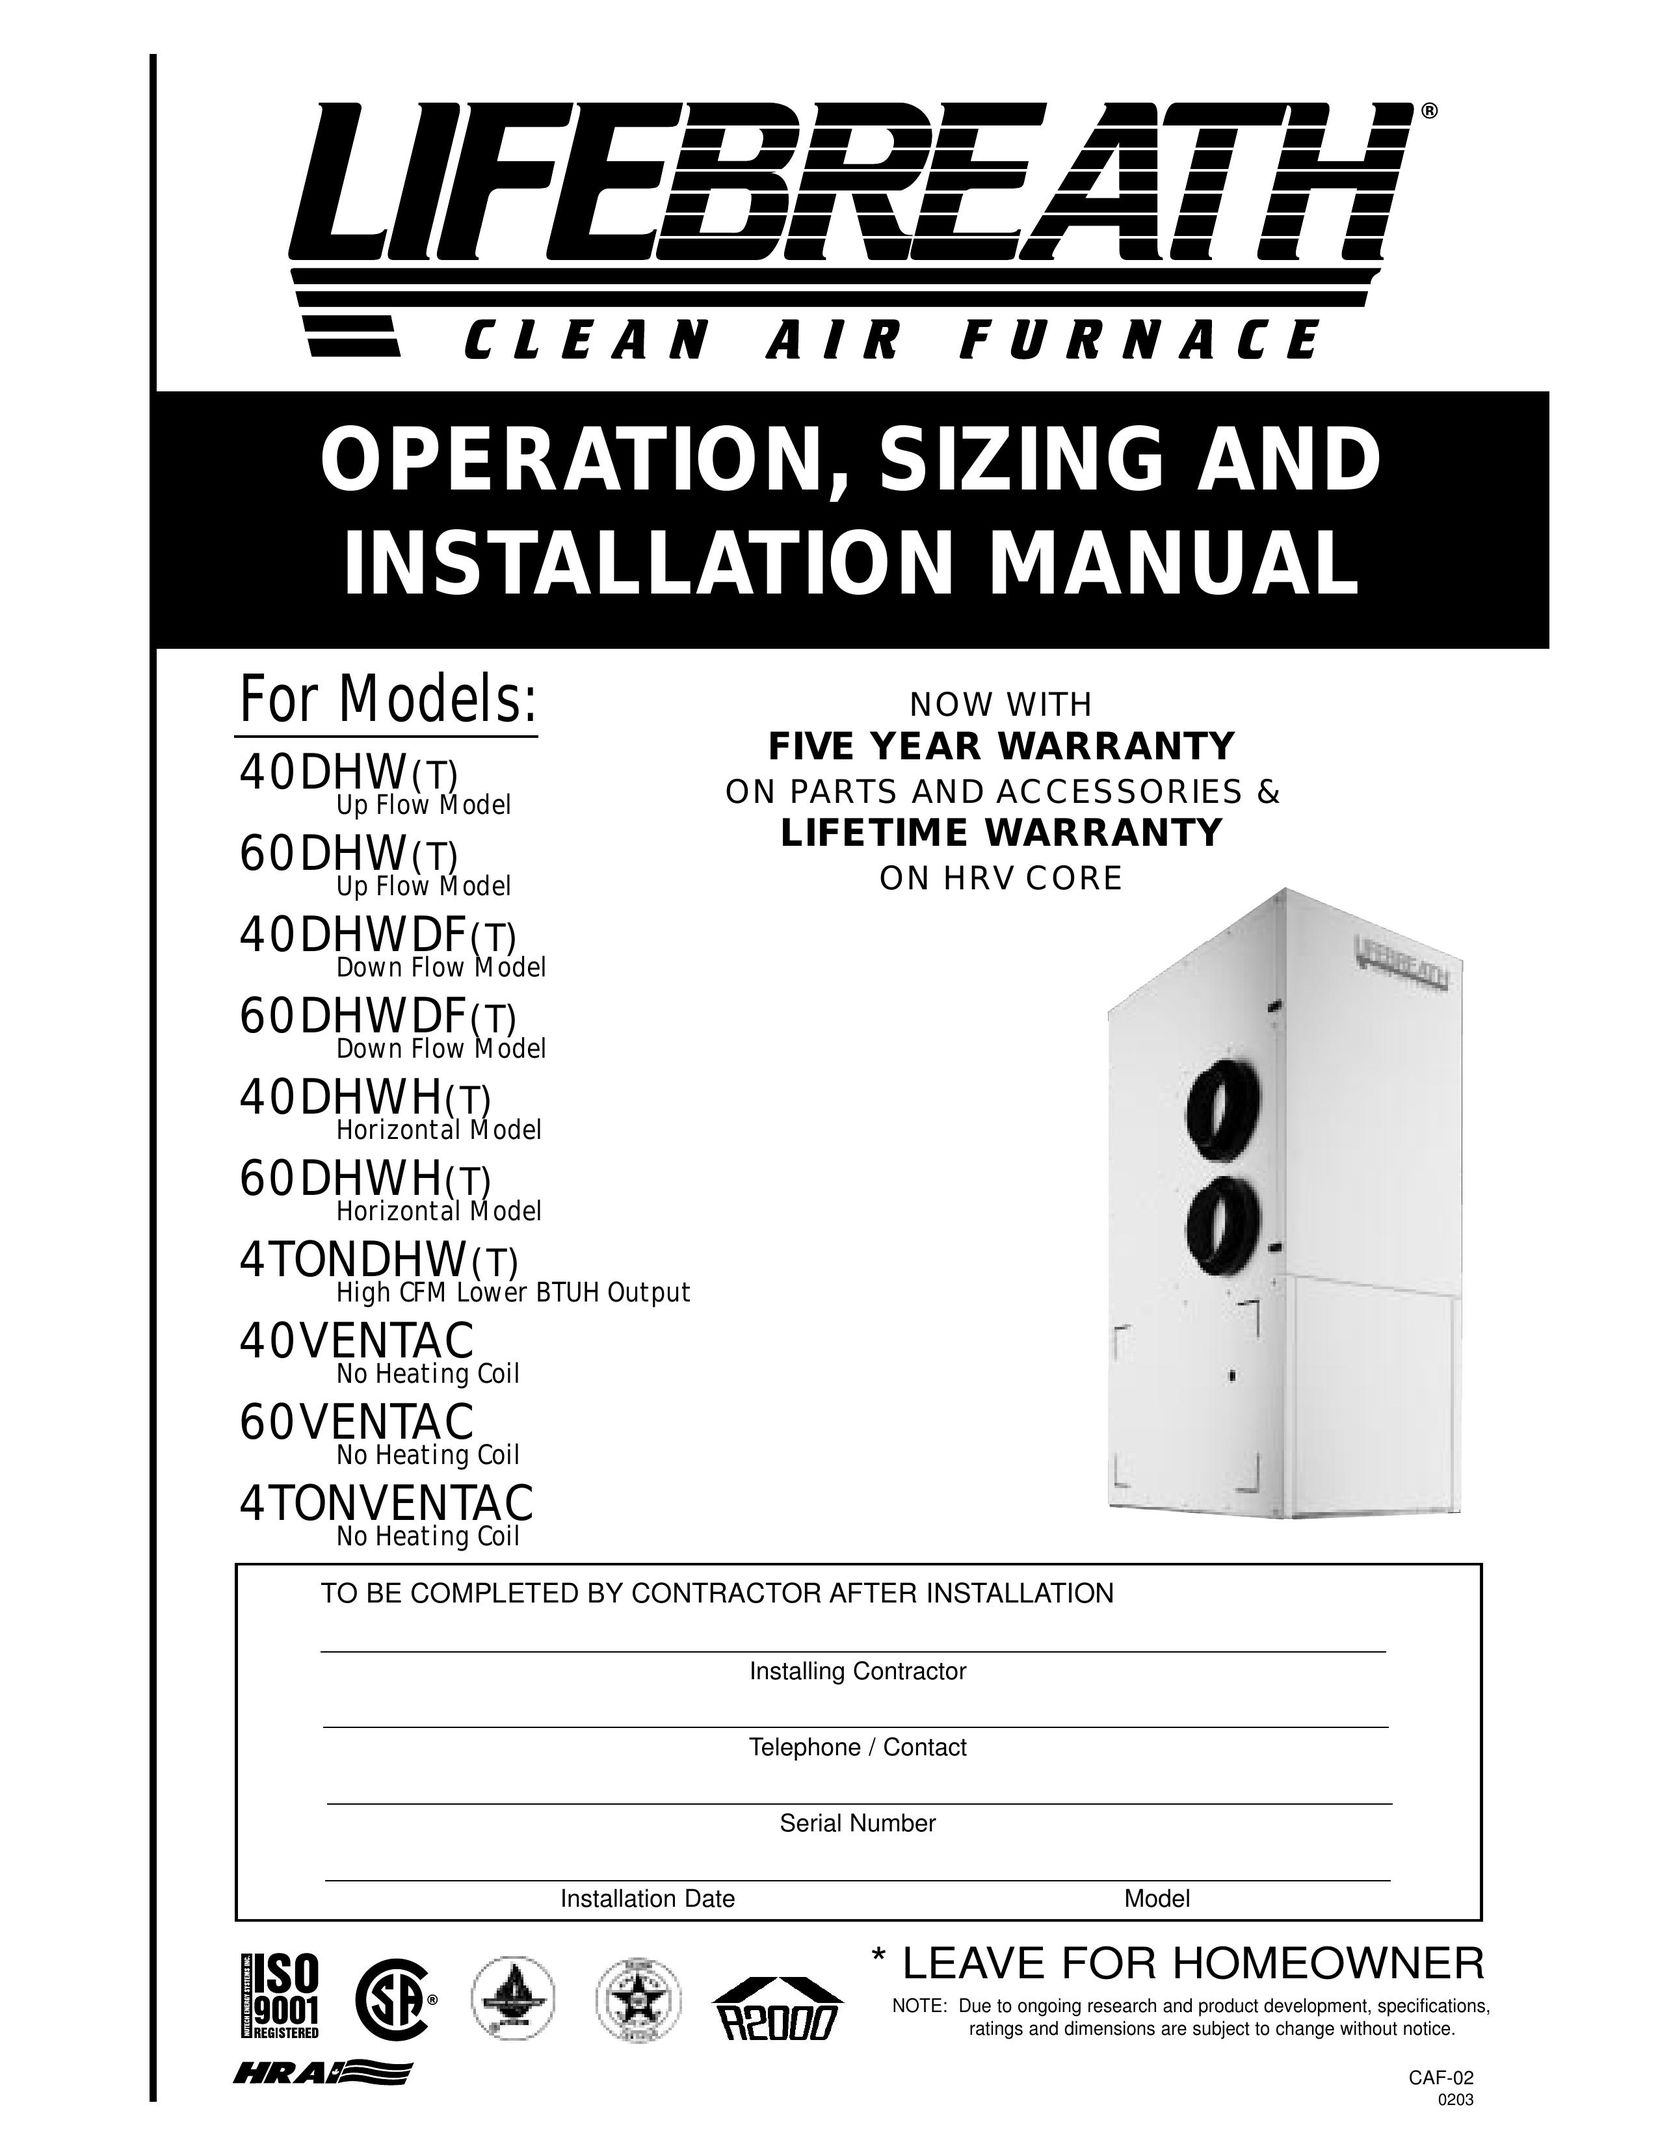 Lifebreath 40DHWH(T) Thermostat User Manual